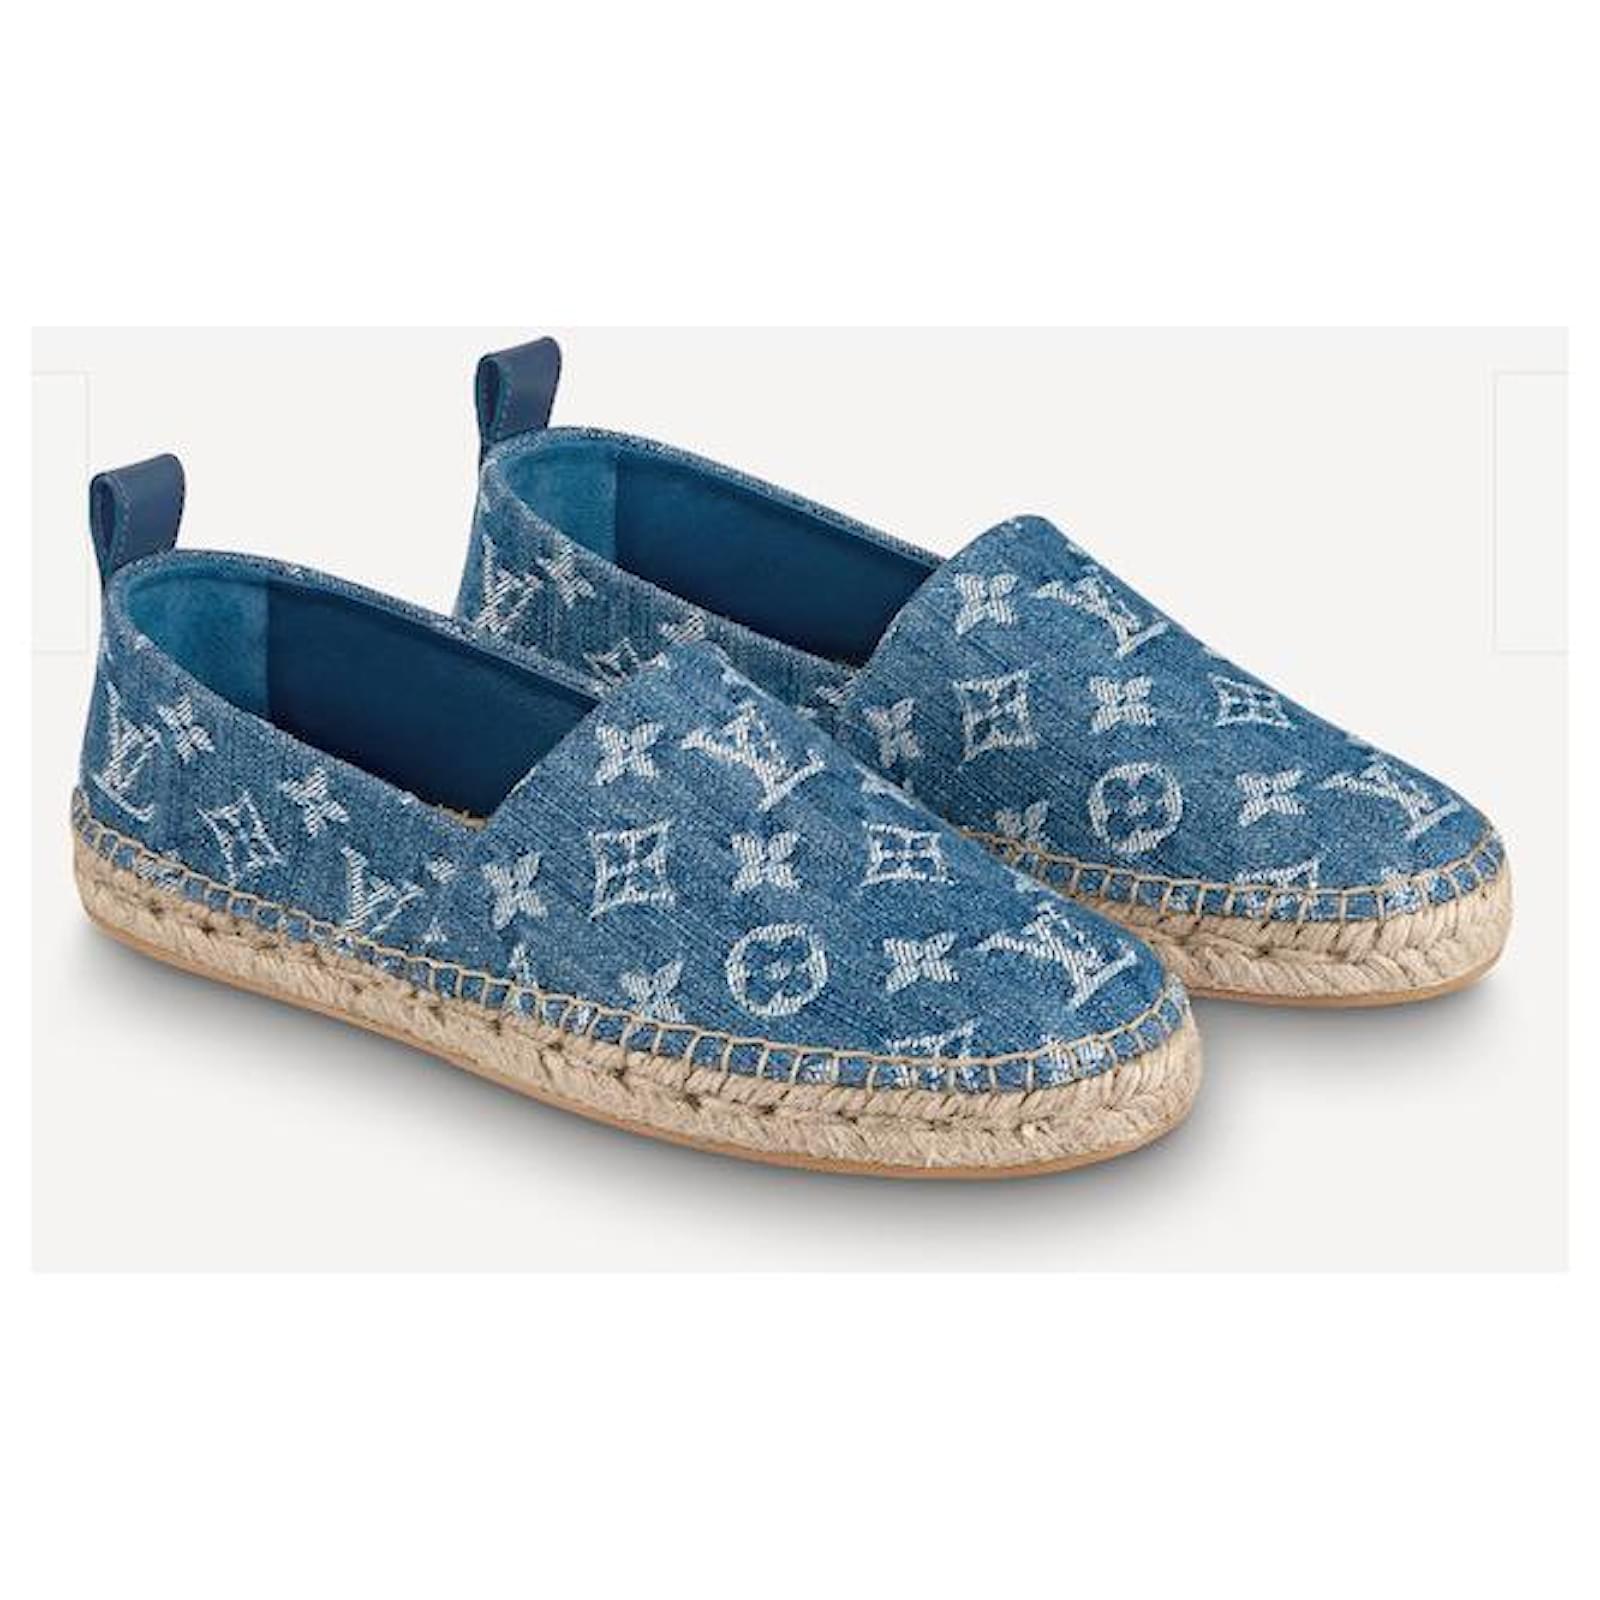 Louis Vuitton 'Starboard' Espadrilles - Women's 40 – Fashionably Yours